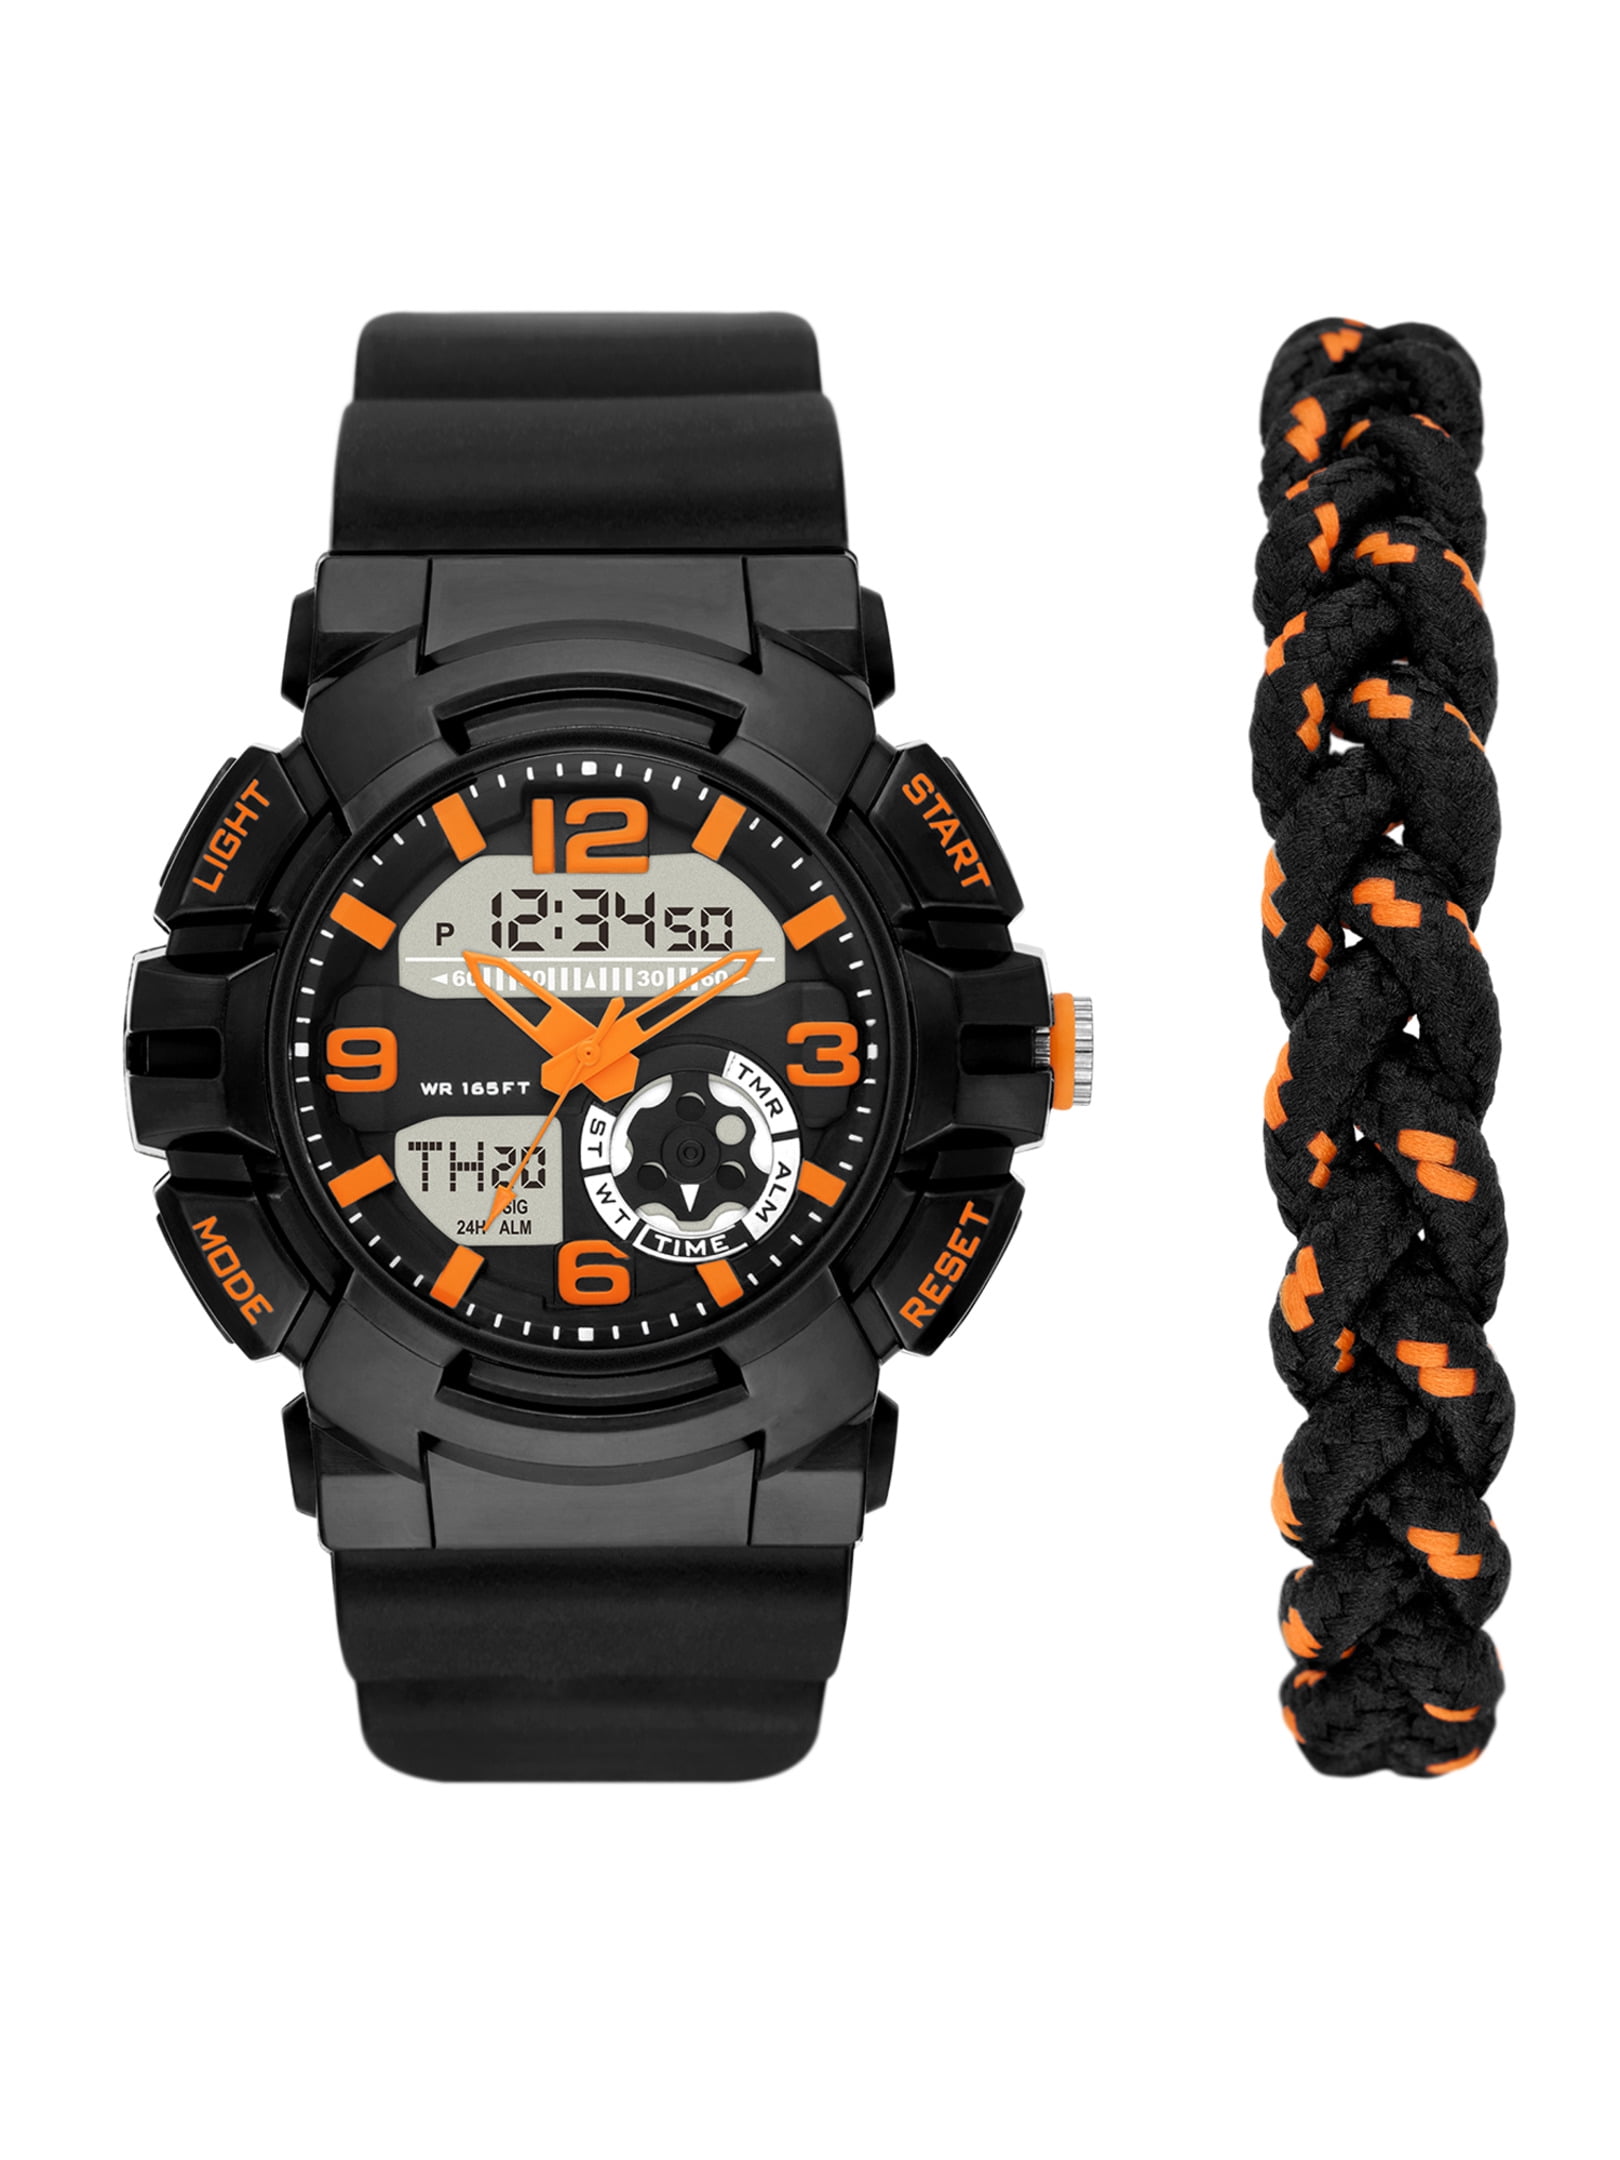 George Men's Analog-Digital Watch Set with Black Round Plastic Case, Black Dial with Postive Display and Black Pastic Band , Blacjk and Orange Double Woven Bracelet